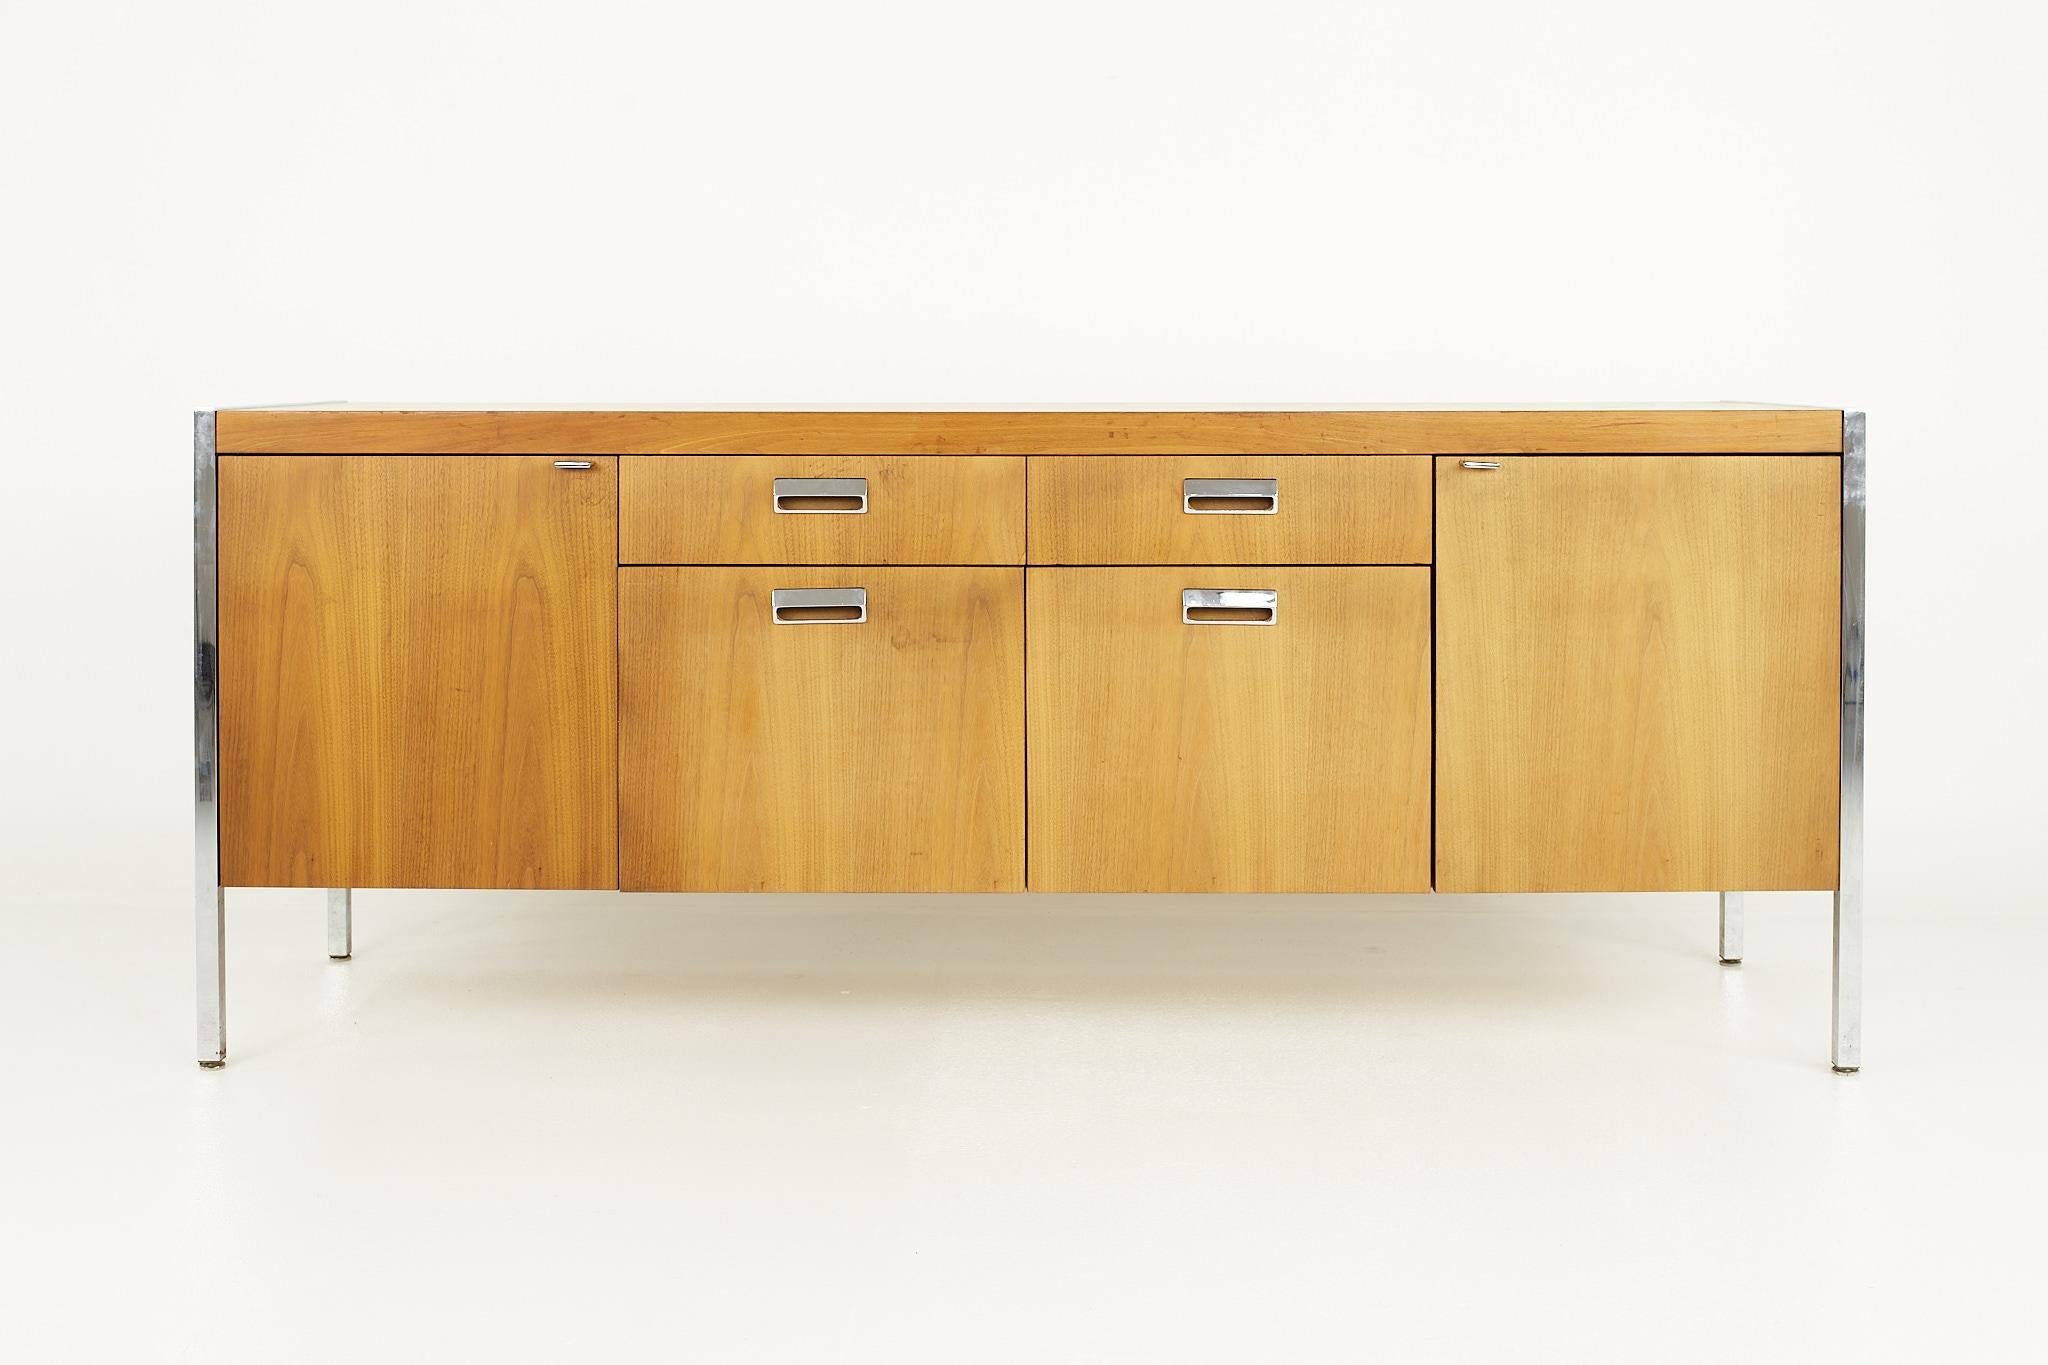 Knoll style mid century walnut and chrome office sideboard credenza

This credenza measures: 72.5 wide x 20 deep x 29.5 inches high

?All pieces of furniture can be had in what we call restored vintage condition. That means the piece is restored